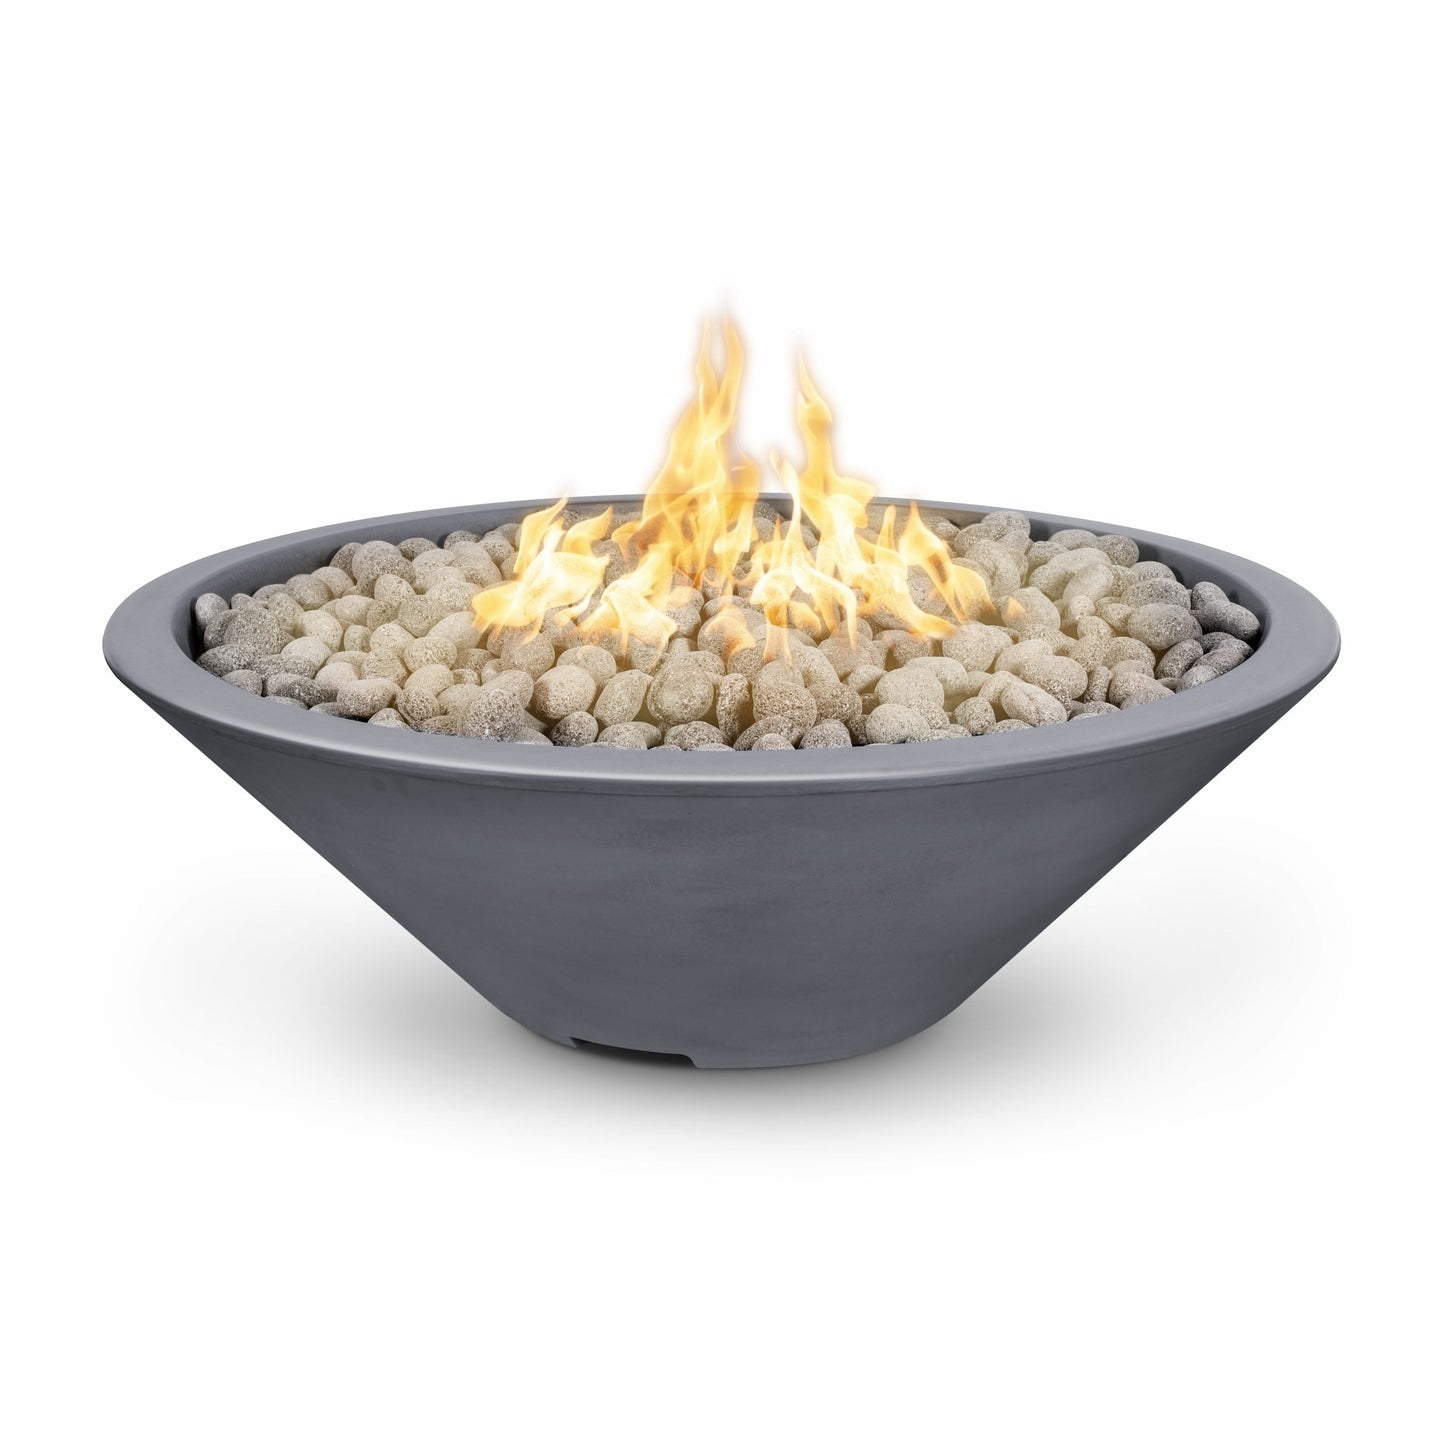 The Outdoor Plus Round Cazo 48" Black Powder Coated Metal Natural Gas Fire Pit with 110V Electronic Ignition